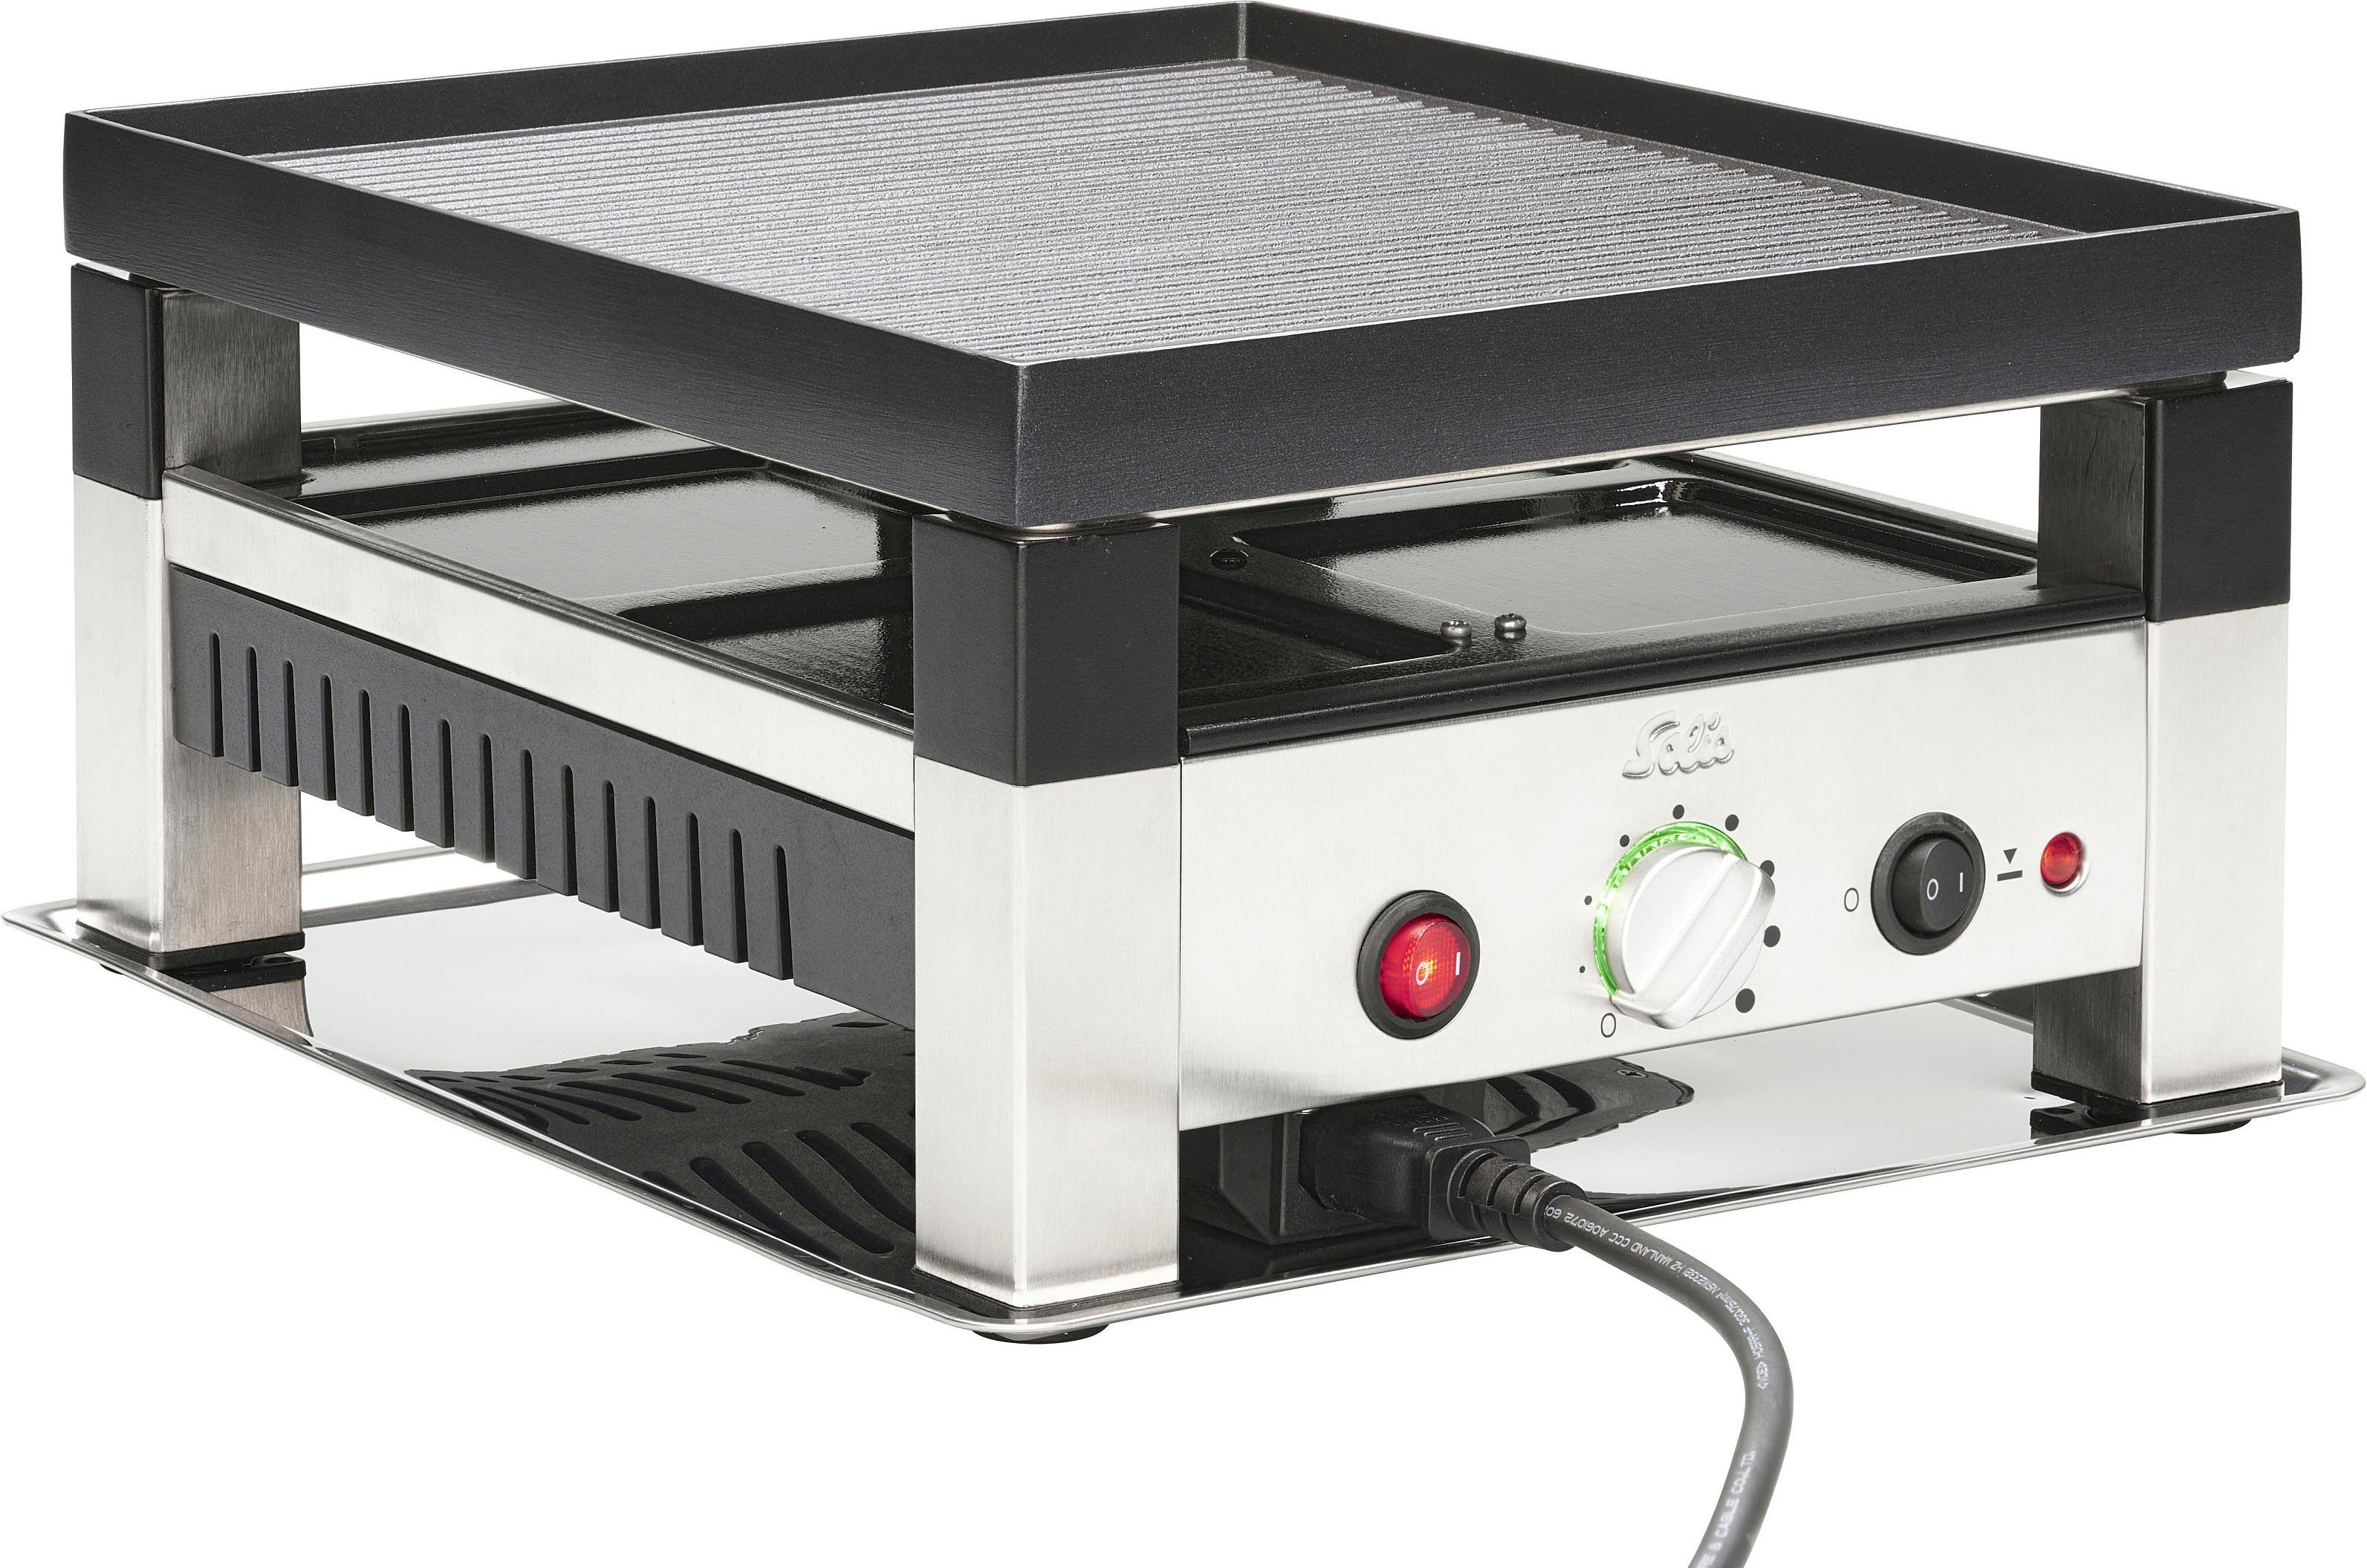 SOLIS OF for Raclettepfännchen, Table SWITZERLAND 1020 W 4 Raclette 1 5 Grill in 4